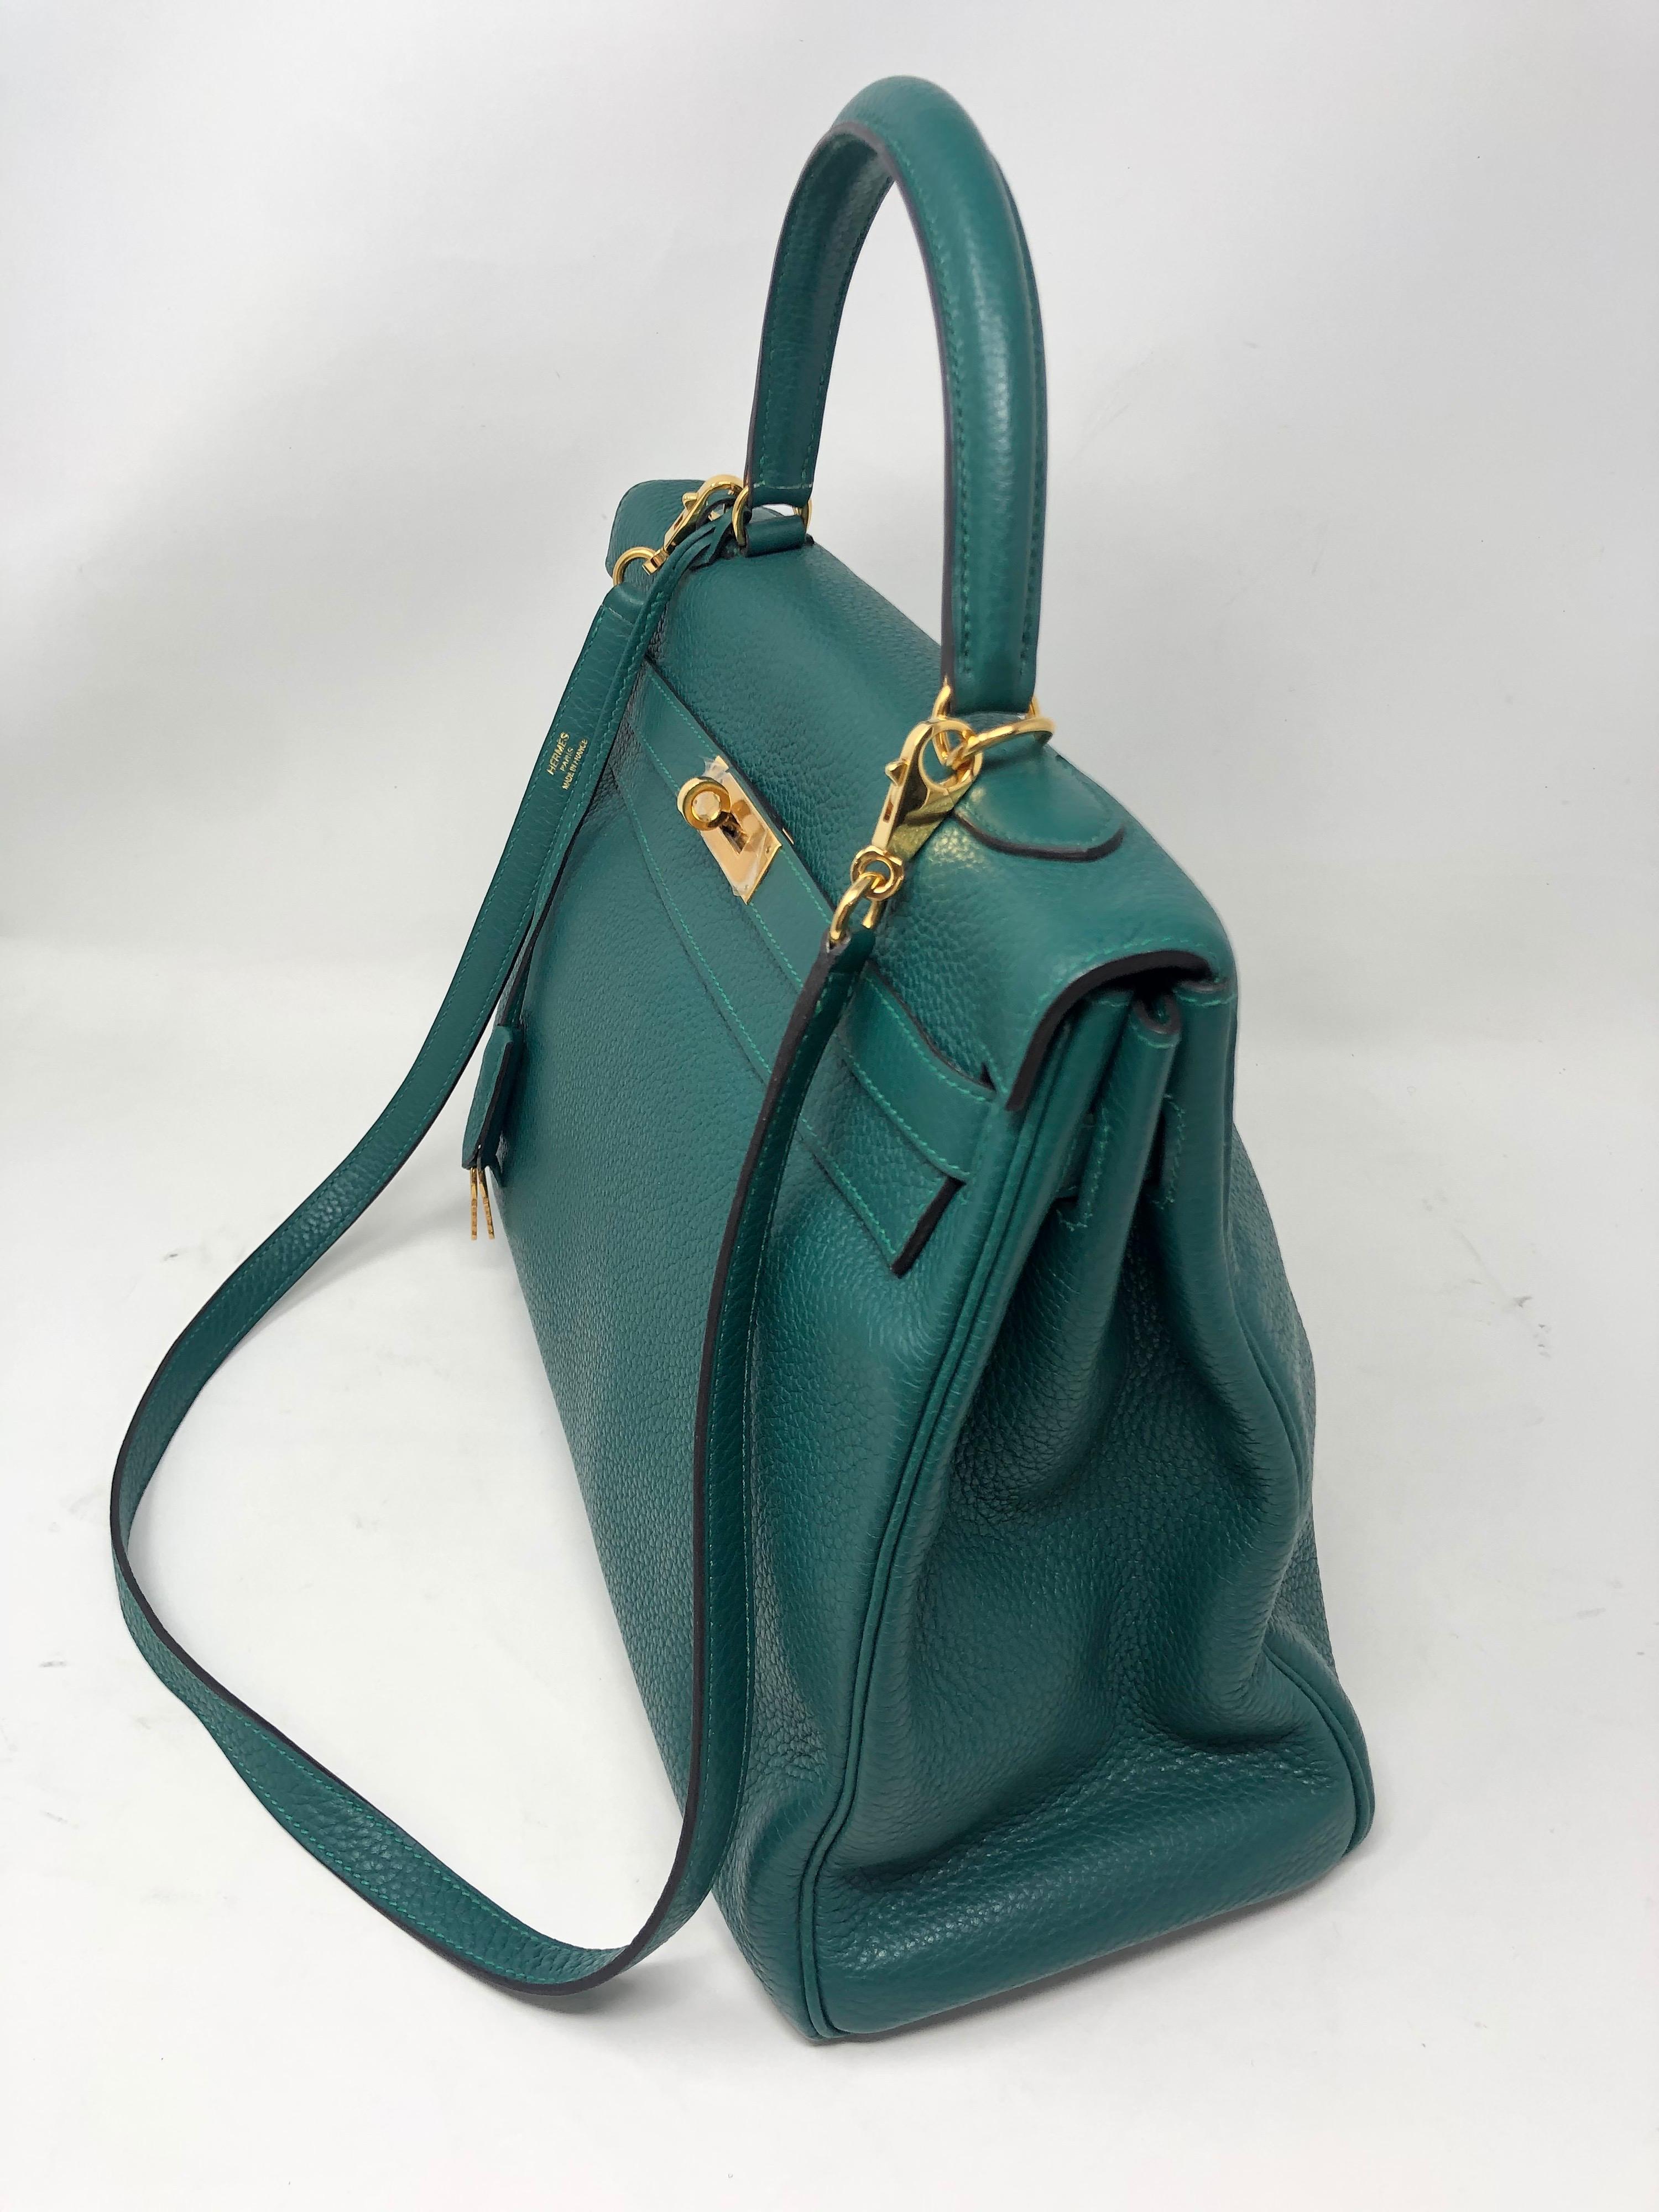 Hermes malachite green Kelly 35 bag with gold hardware. Excellent condition. Plastic still on hardware. Togo leather. B square. Includes lock, keys, clochette and Hermes dust cover. Guaranteed authentic. 